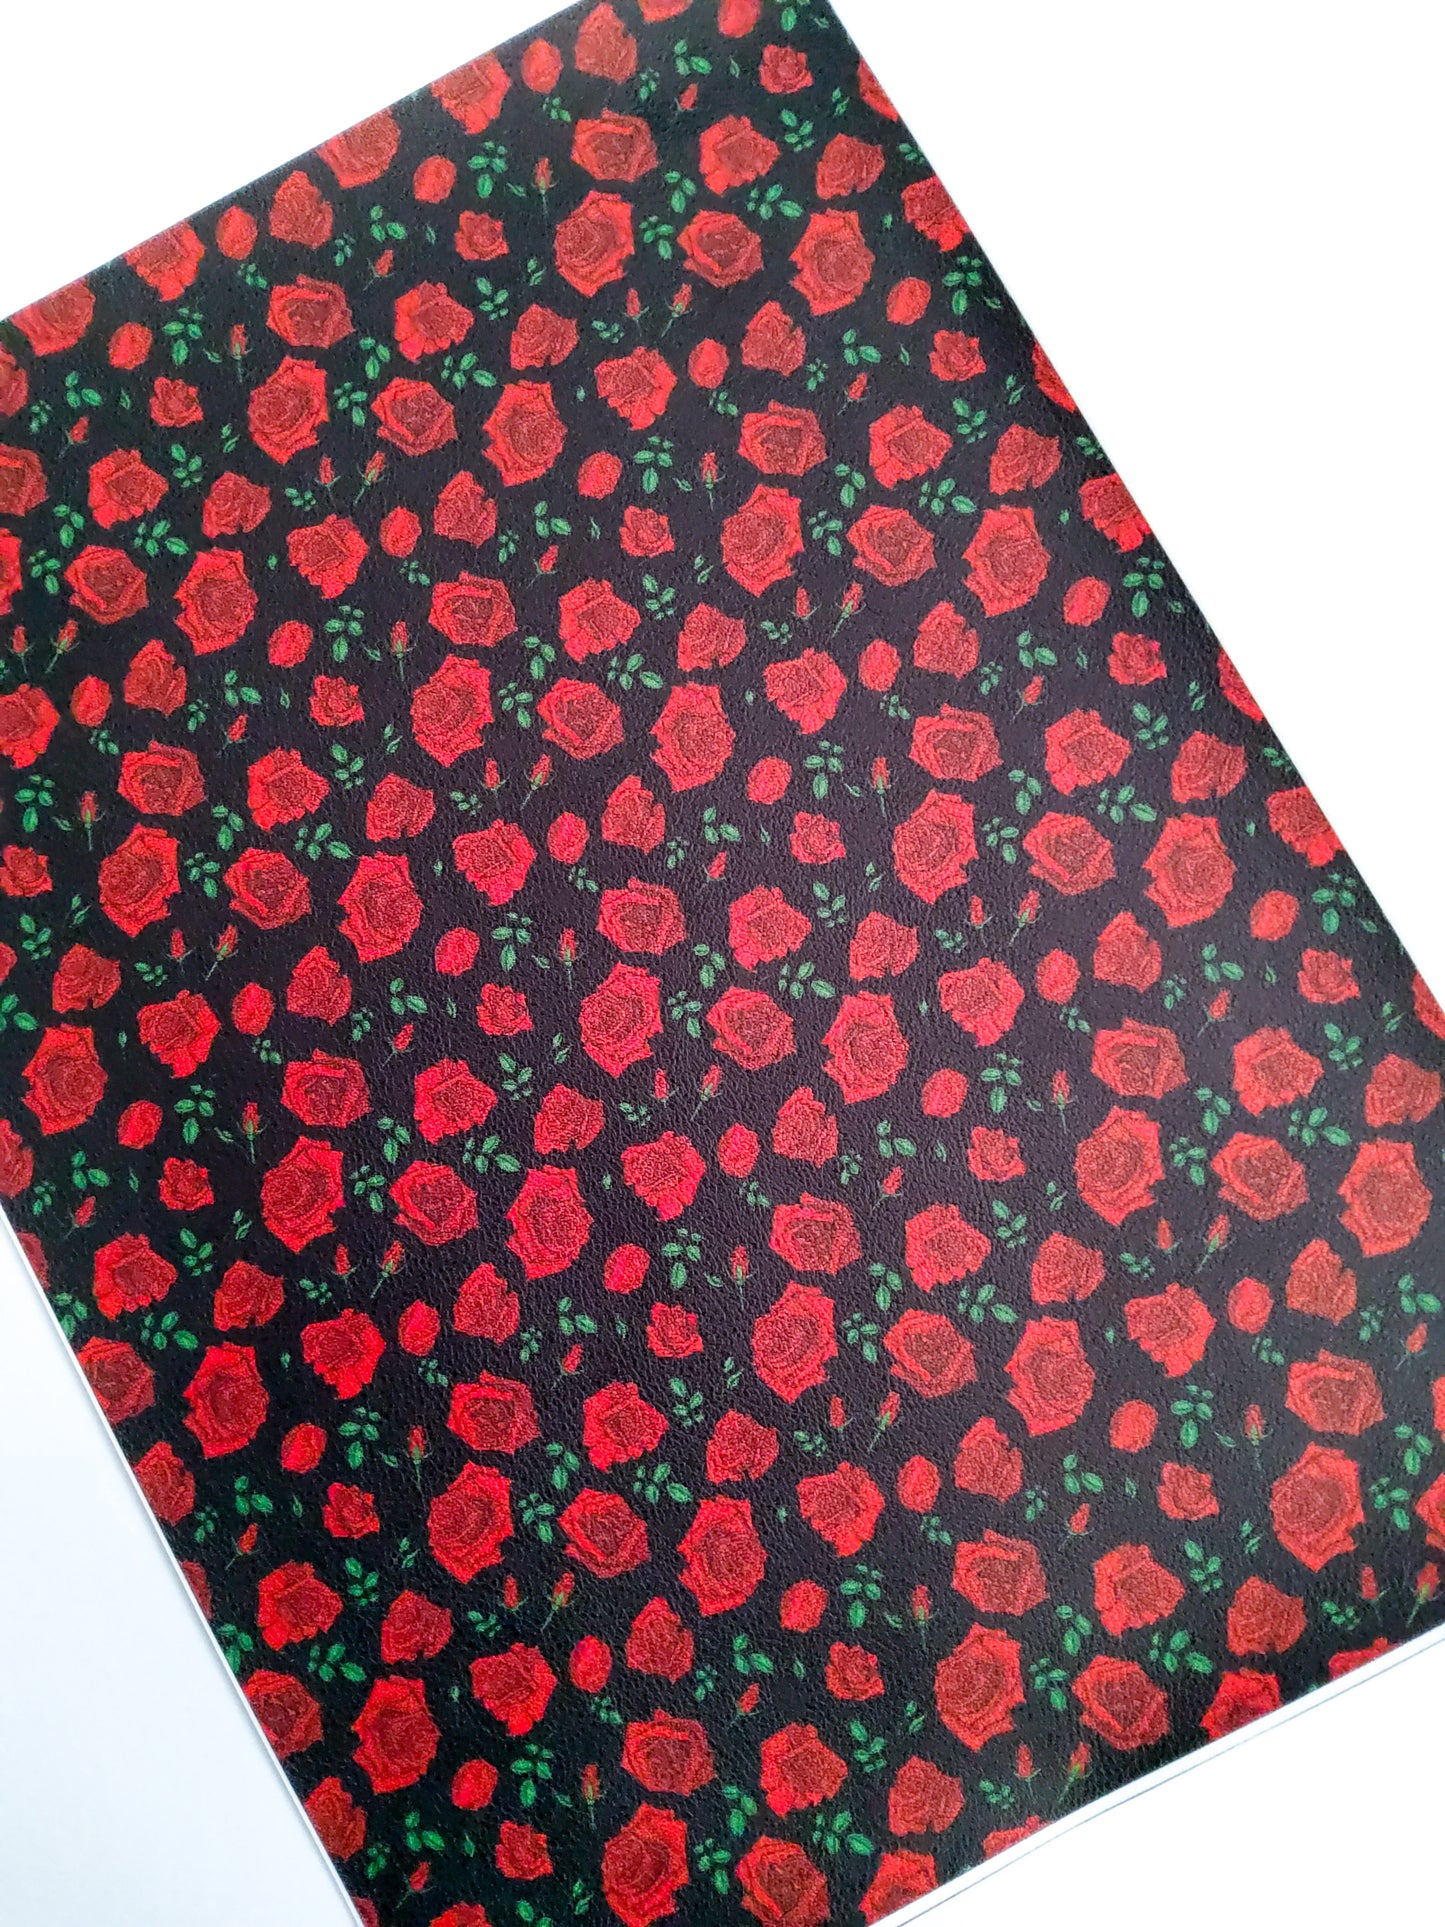 Red Roses 9x12 faux leather sheet